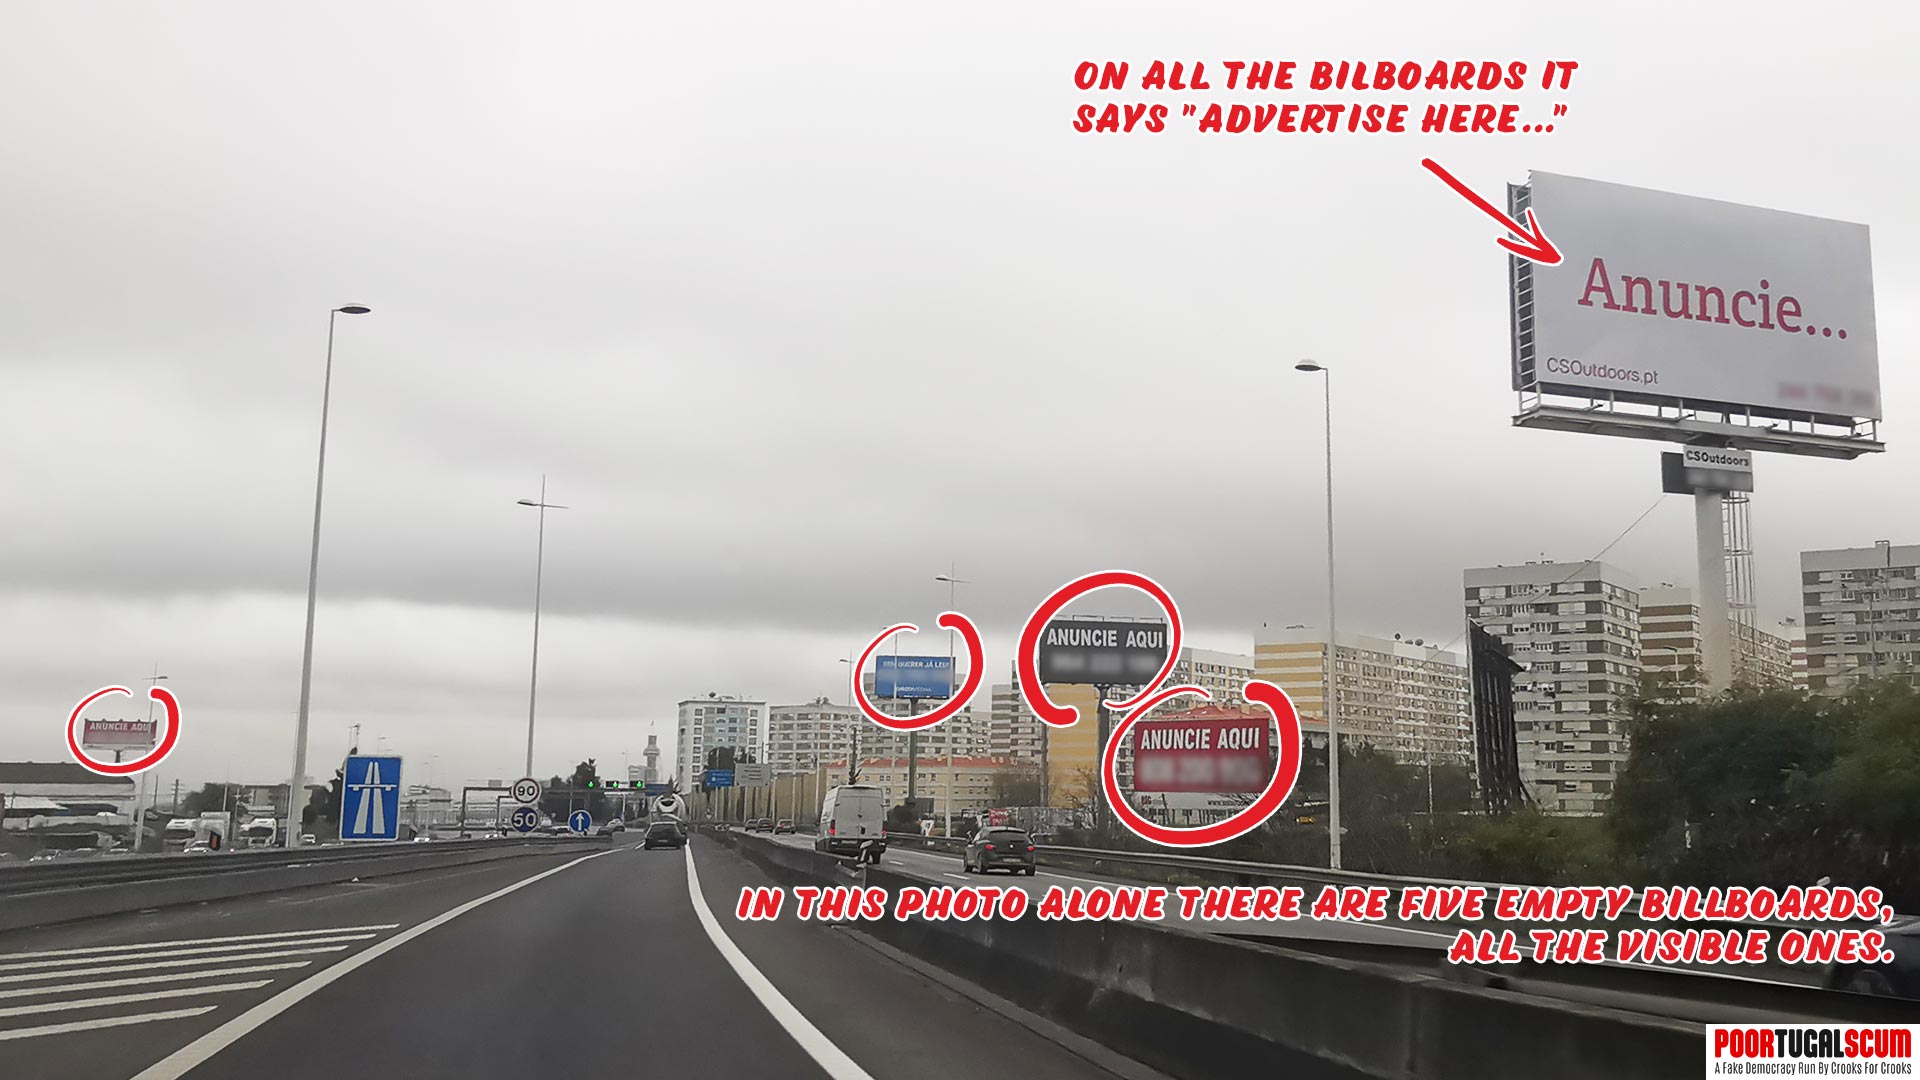 Portuguese billboards without ads